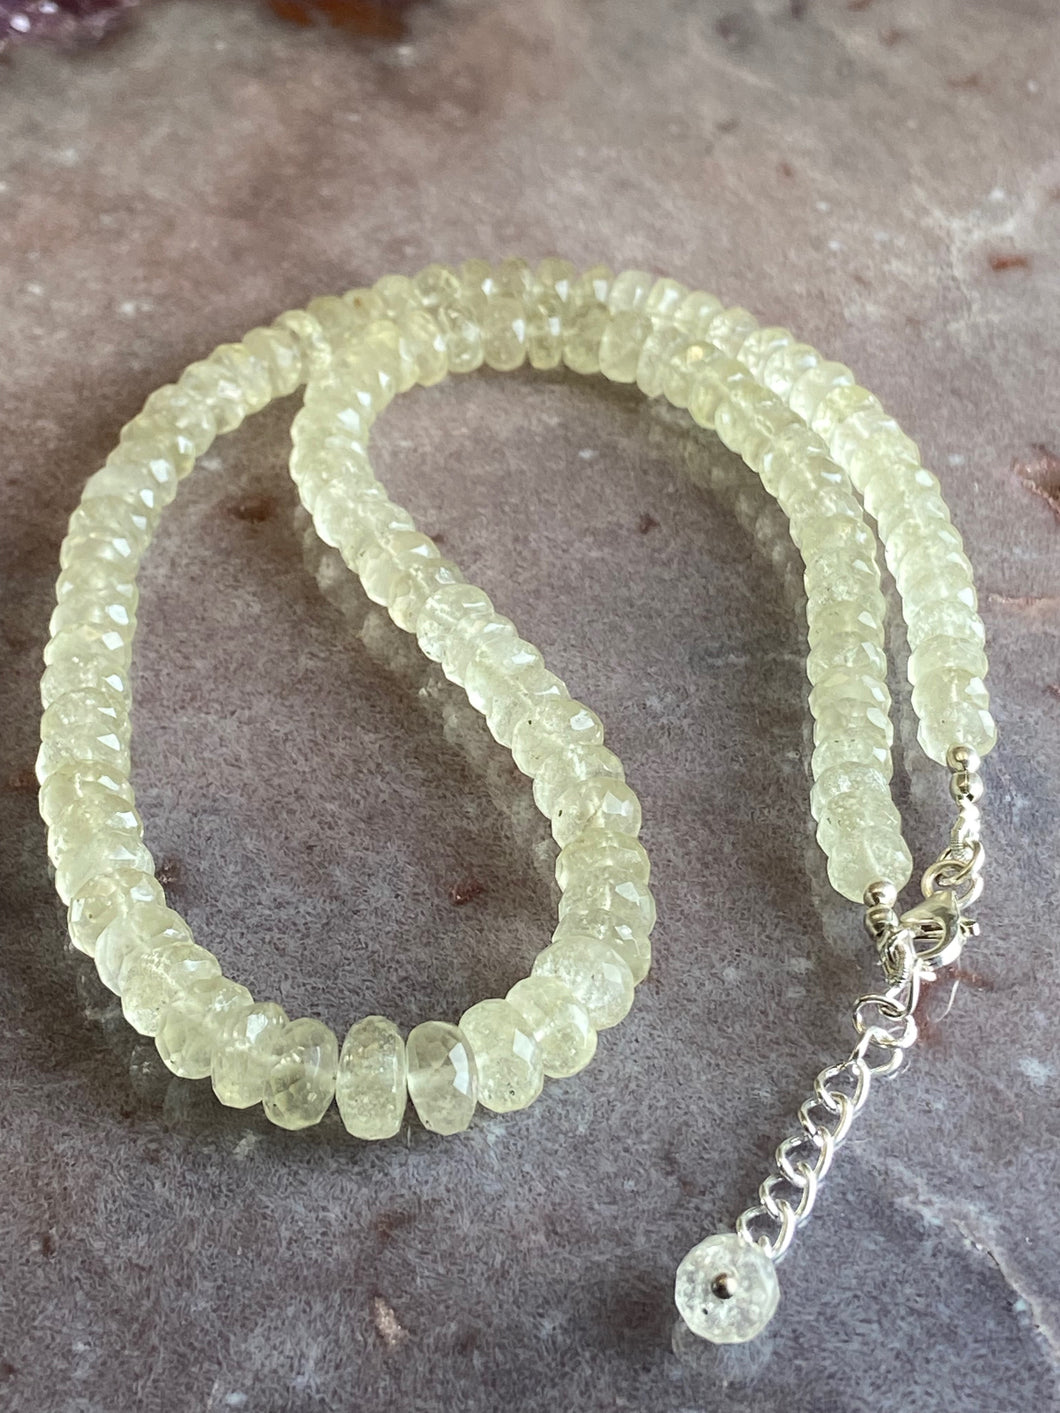 Libyan desert glass necklace 2 faceted